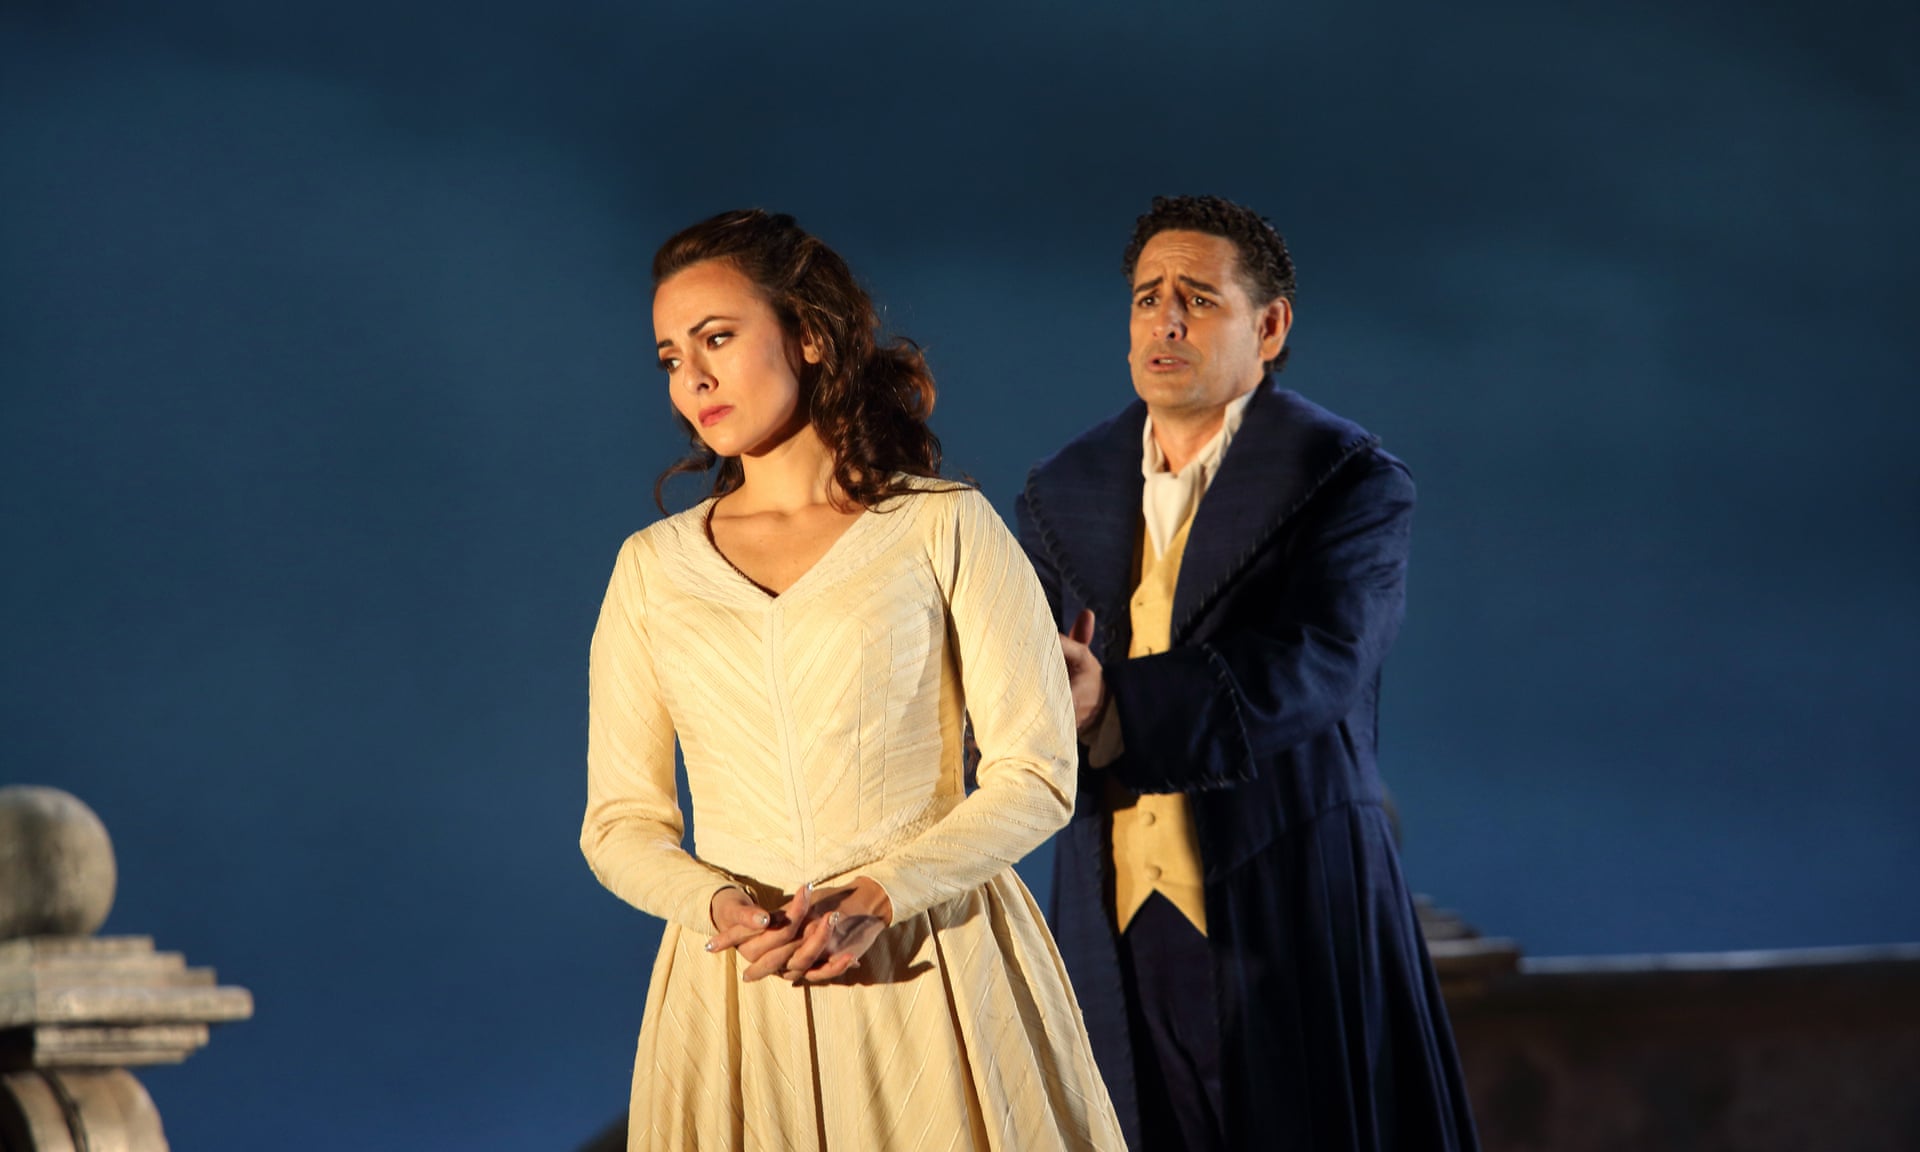 Isabel Leonard and Juan Diego Flórez in Werther at the Royal Opera House, London (photograph by Catherine Ashmore)